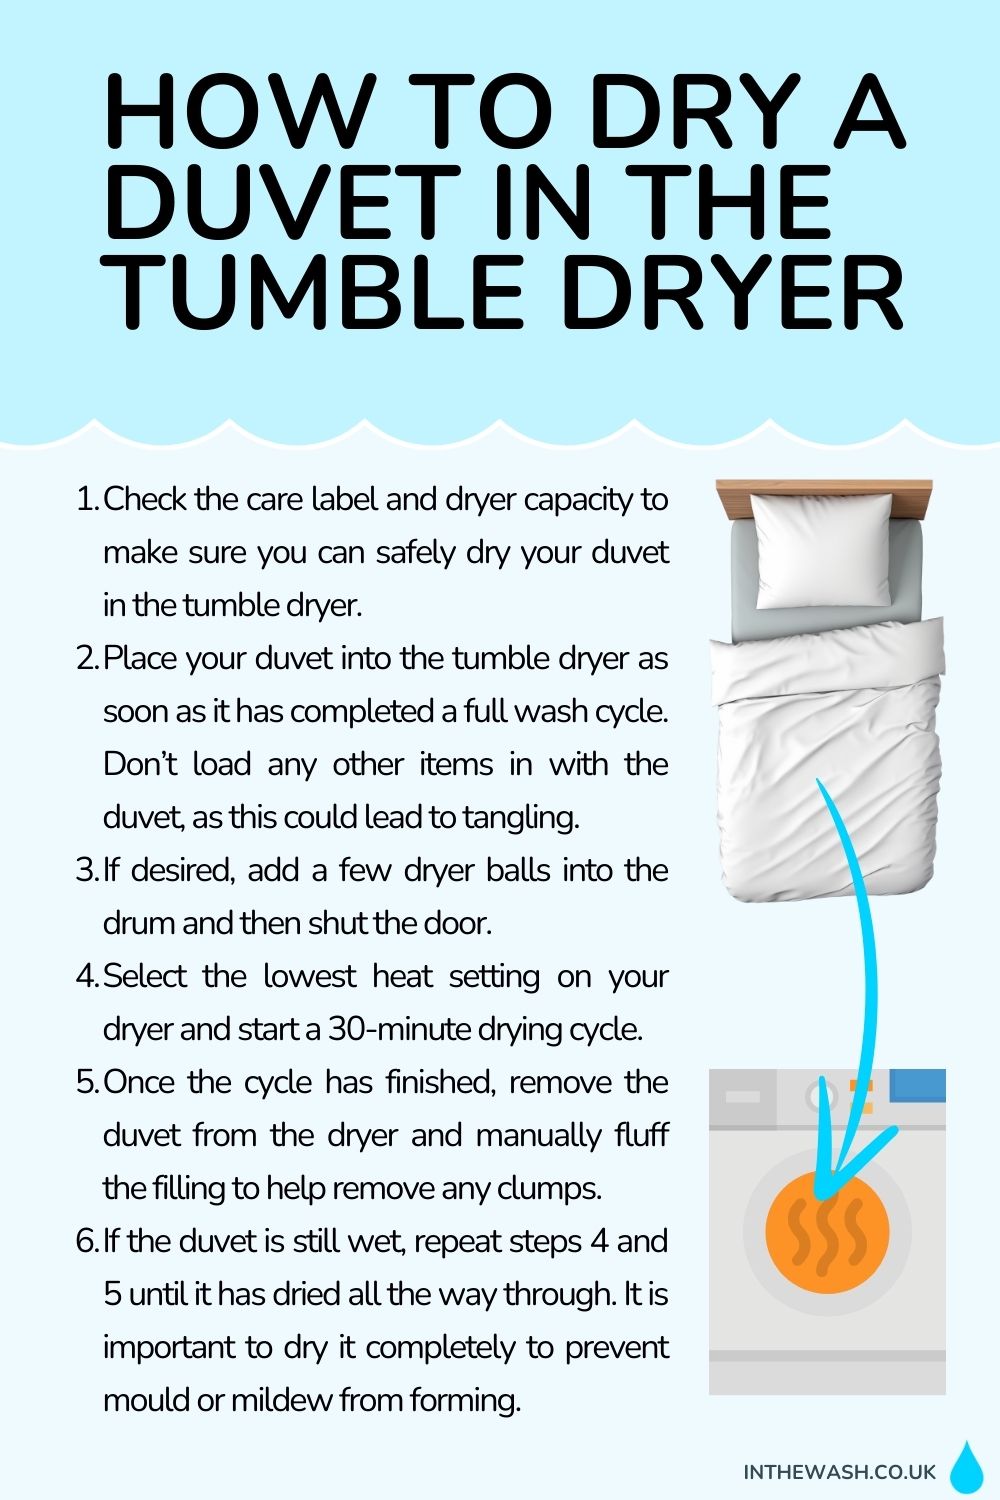 How to dry a duvet in the tumble dryer